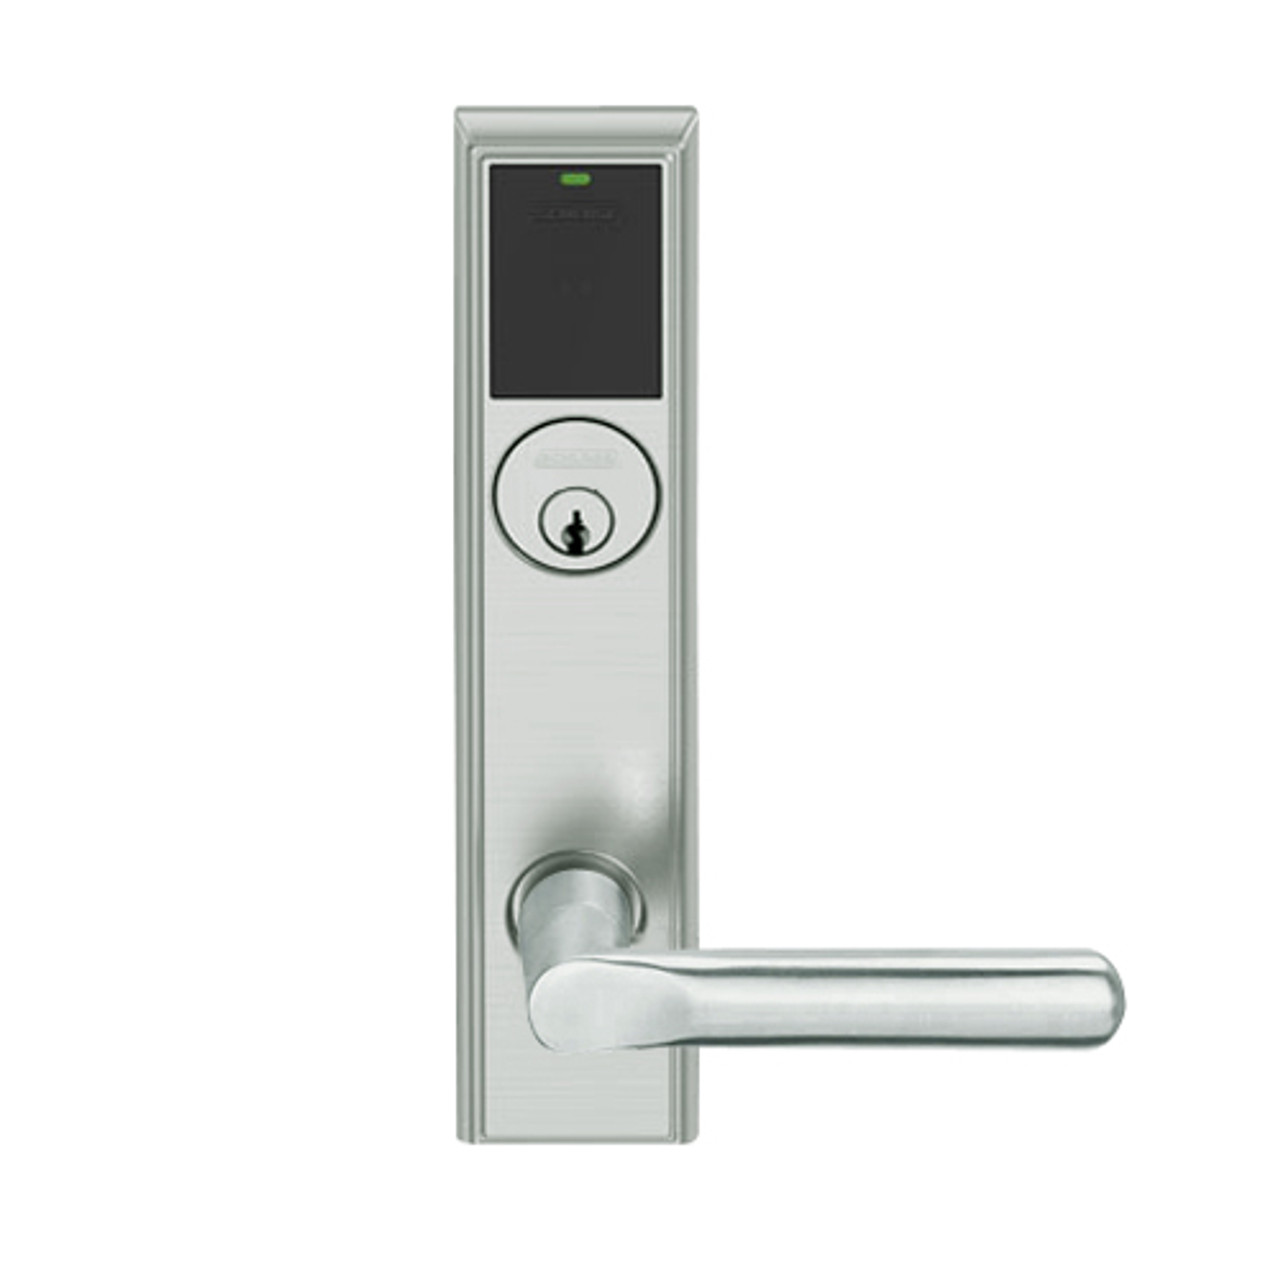 LEMD-ADD-P-18-619 Schlage Privacy/Apartment Wireless Addison Mortise Deadbolt Lock with LED and 18 Lever in Satin Nickel